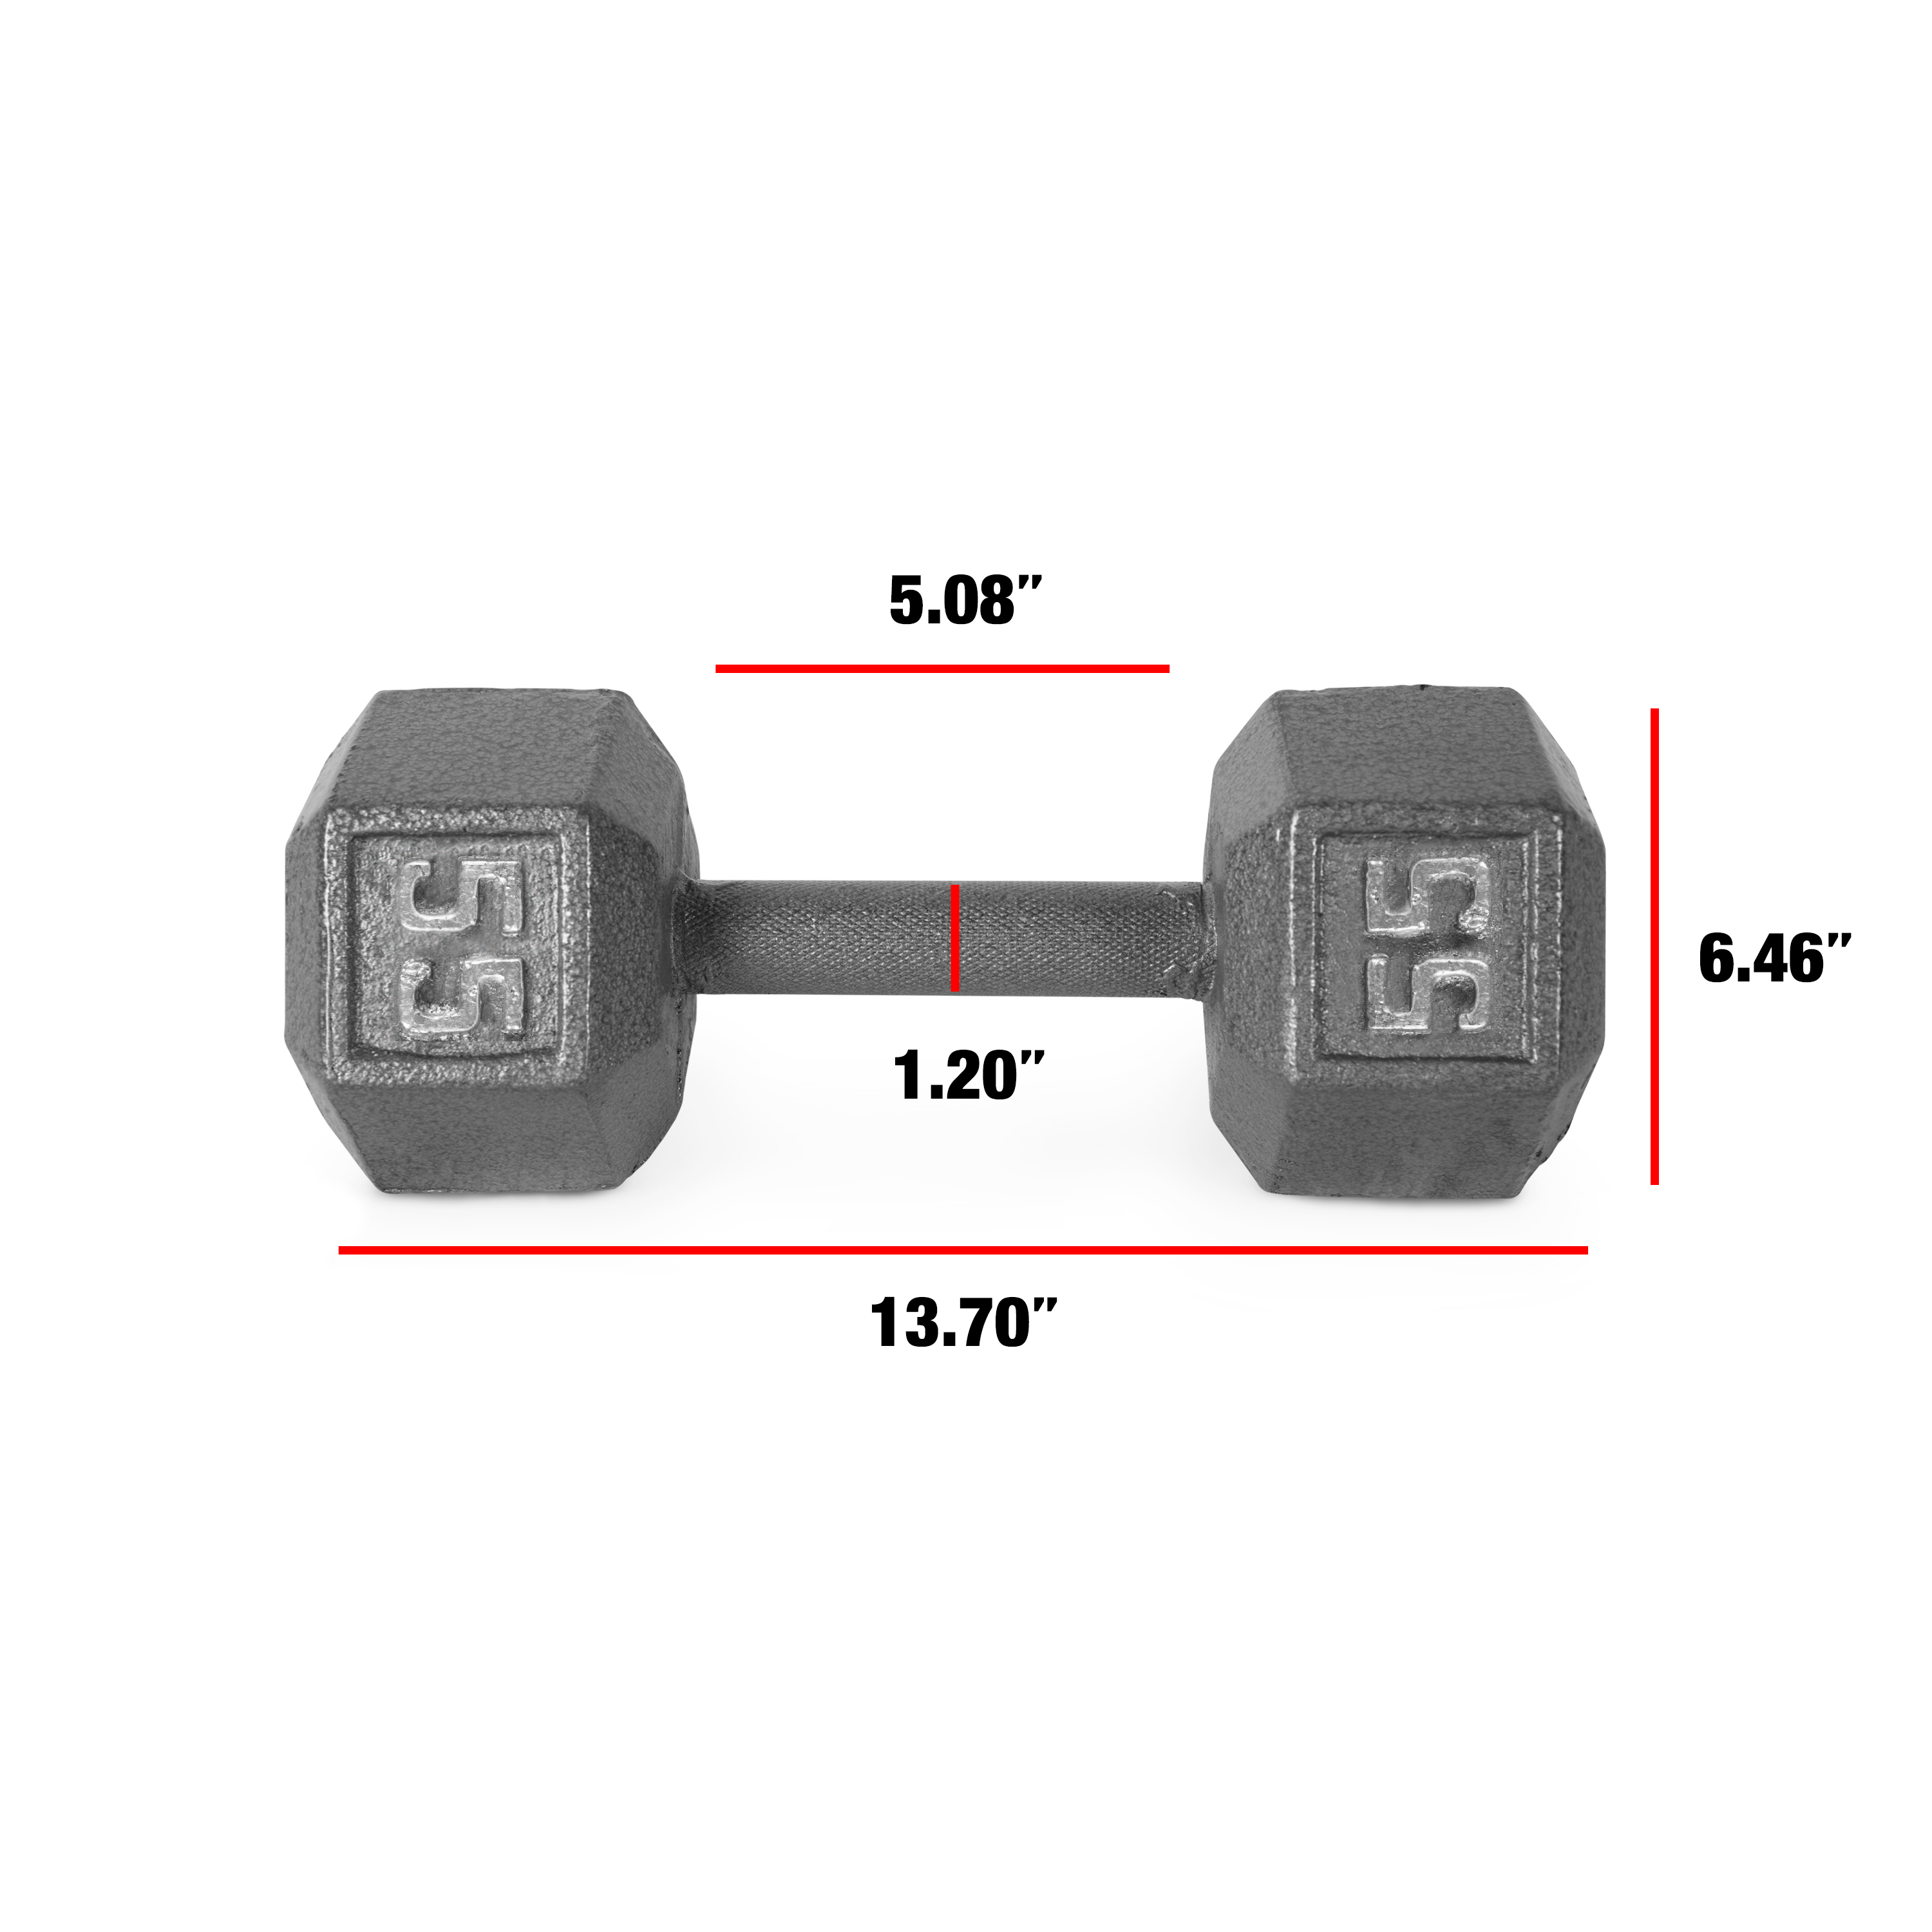 CAP Barbell 55lb Cast Iron Hex Dumbbell, Single - image 3 of 6